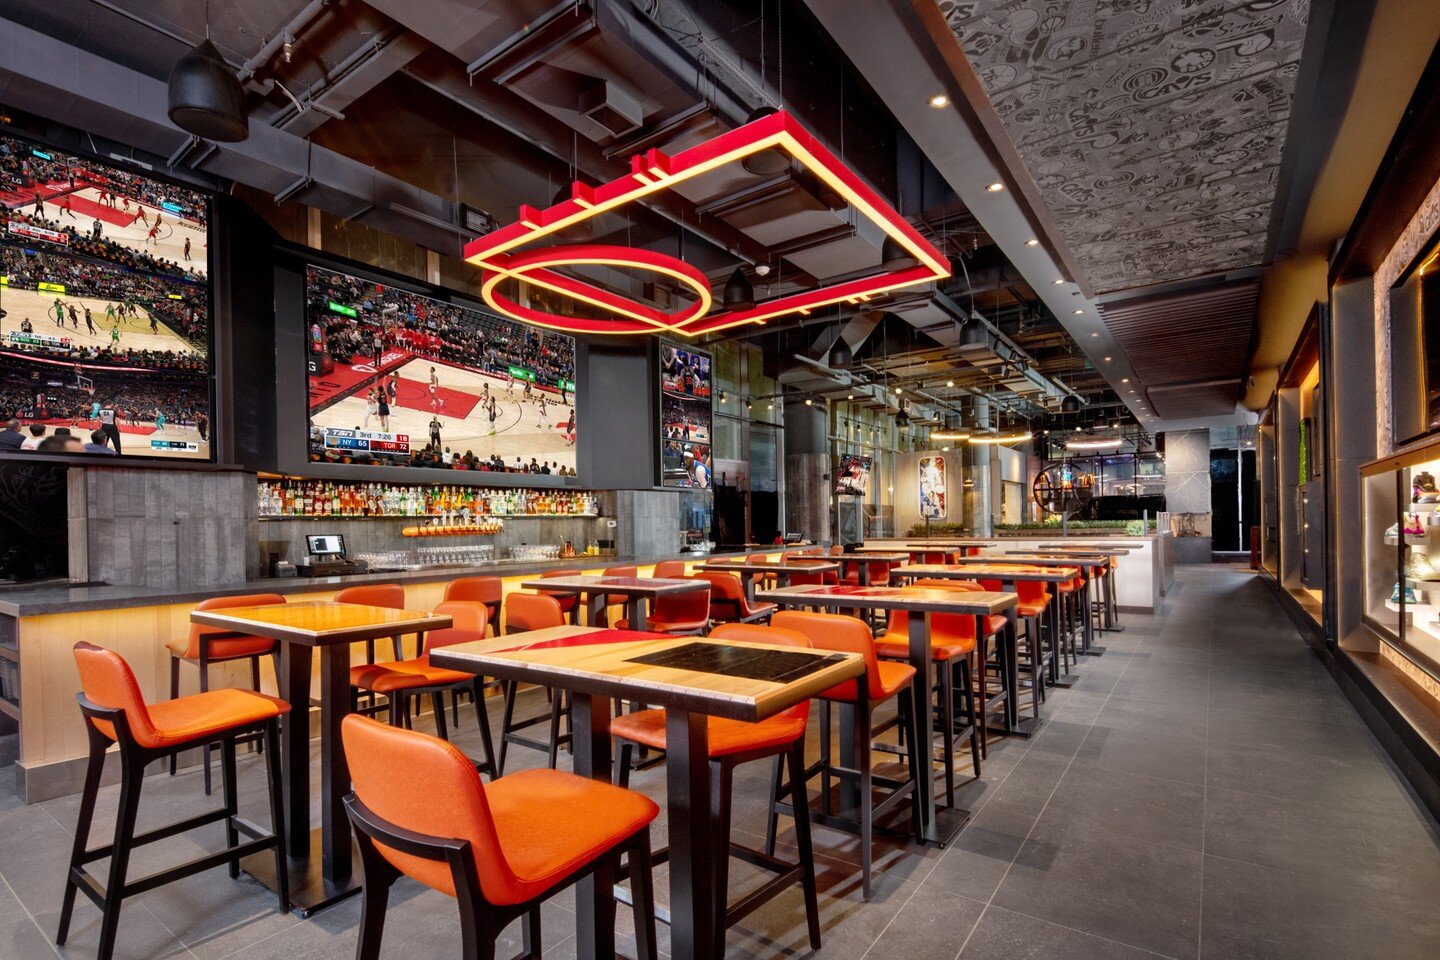 An exciting recent project we photographed, in collaboration with the NBA marketing team, and Urban Dining Group. A new restaurant in Toronto with an incredible ambiance featuring an NBA theme. Next time visiting downtown Toronto I can speak personal